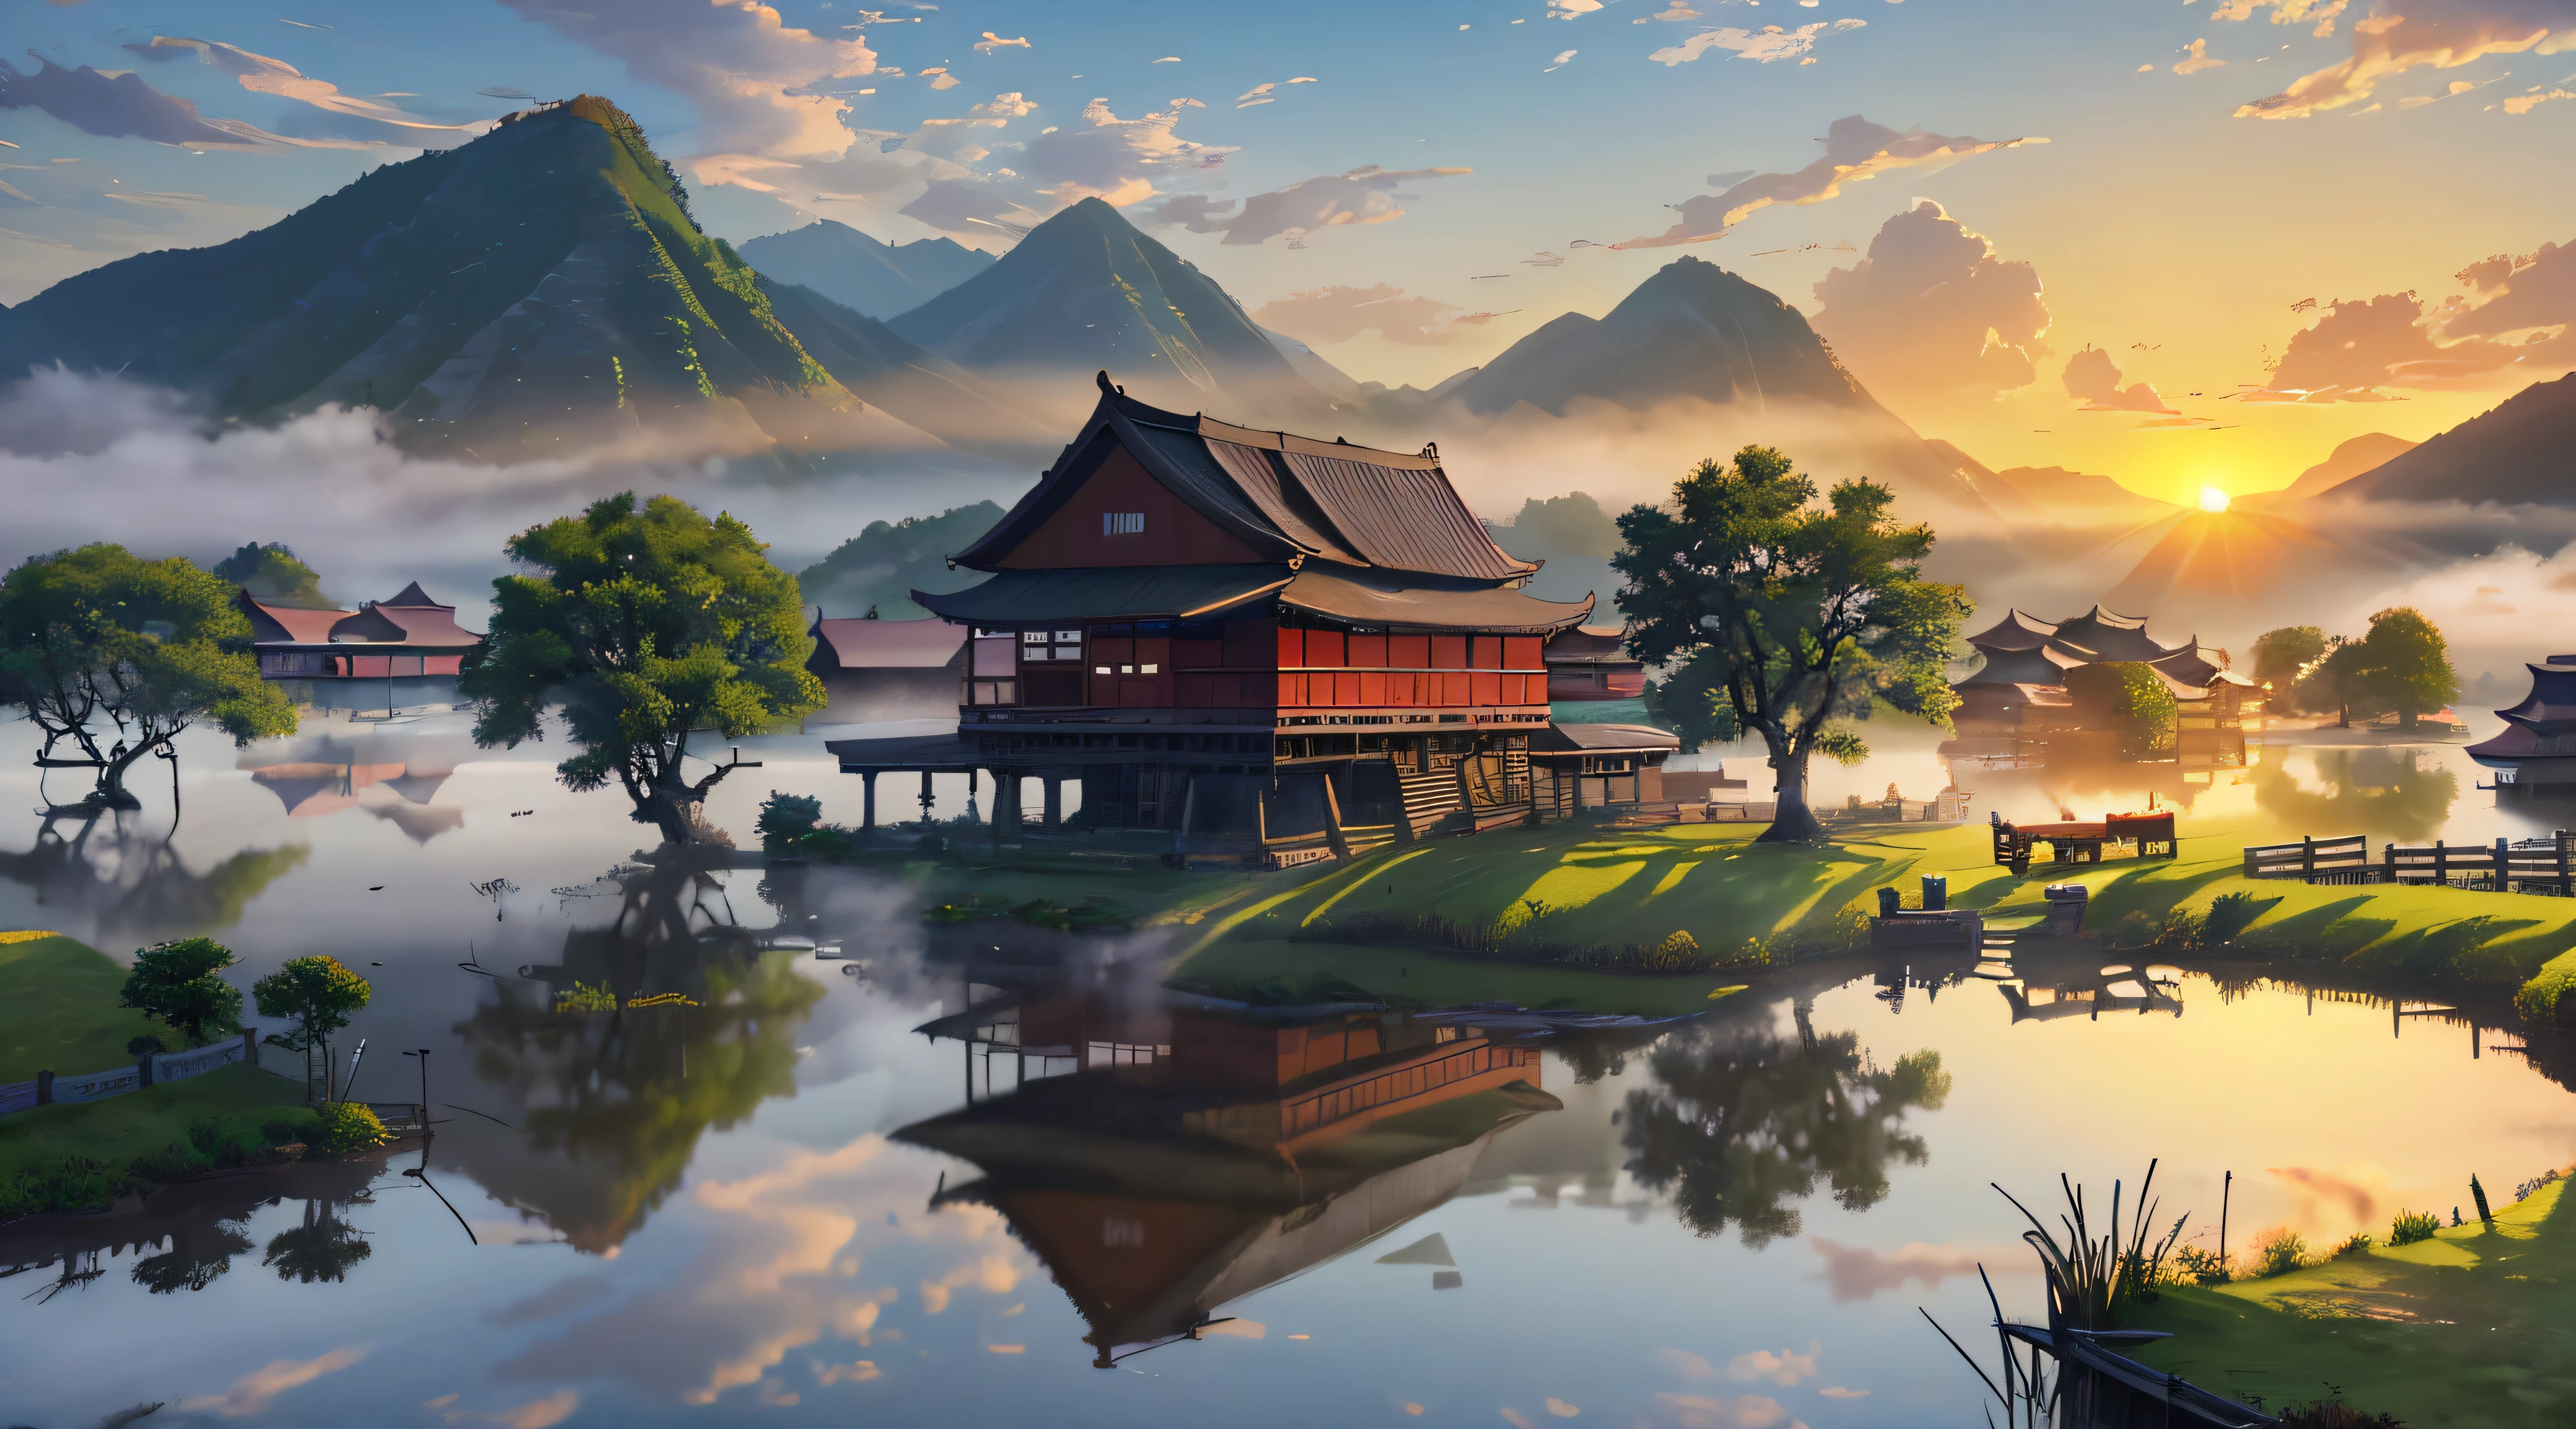 8K,k hd，CG,Complex textures，Complex scenes，Large depth of field，bird's eyes view，complex light，The rising sun，Chinese farmhouse，Morning mist，college，lakes，SUV，ten ten，A man is fishing